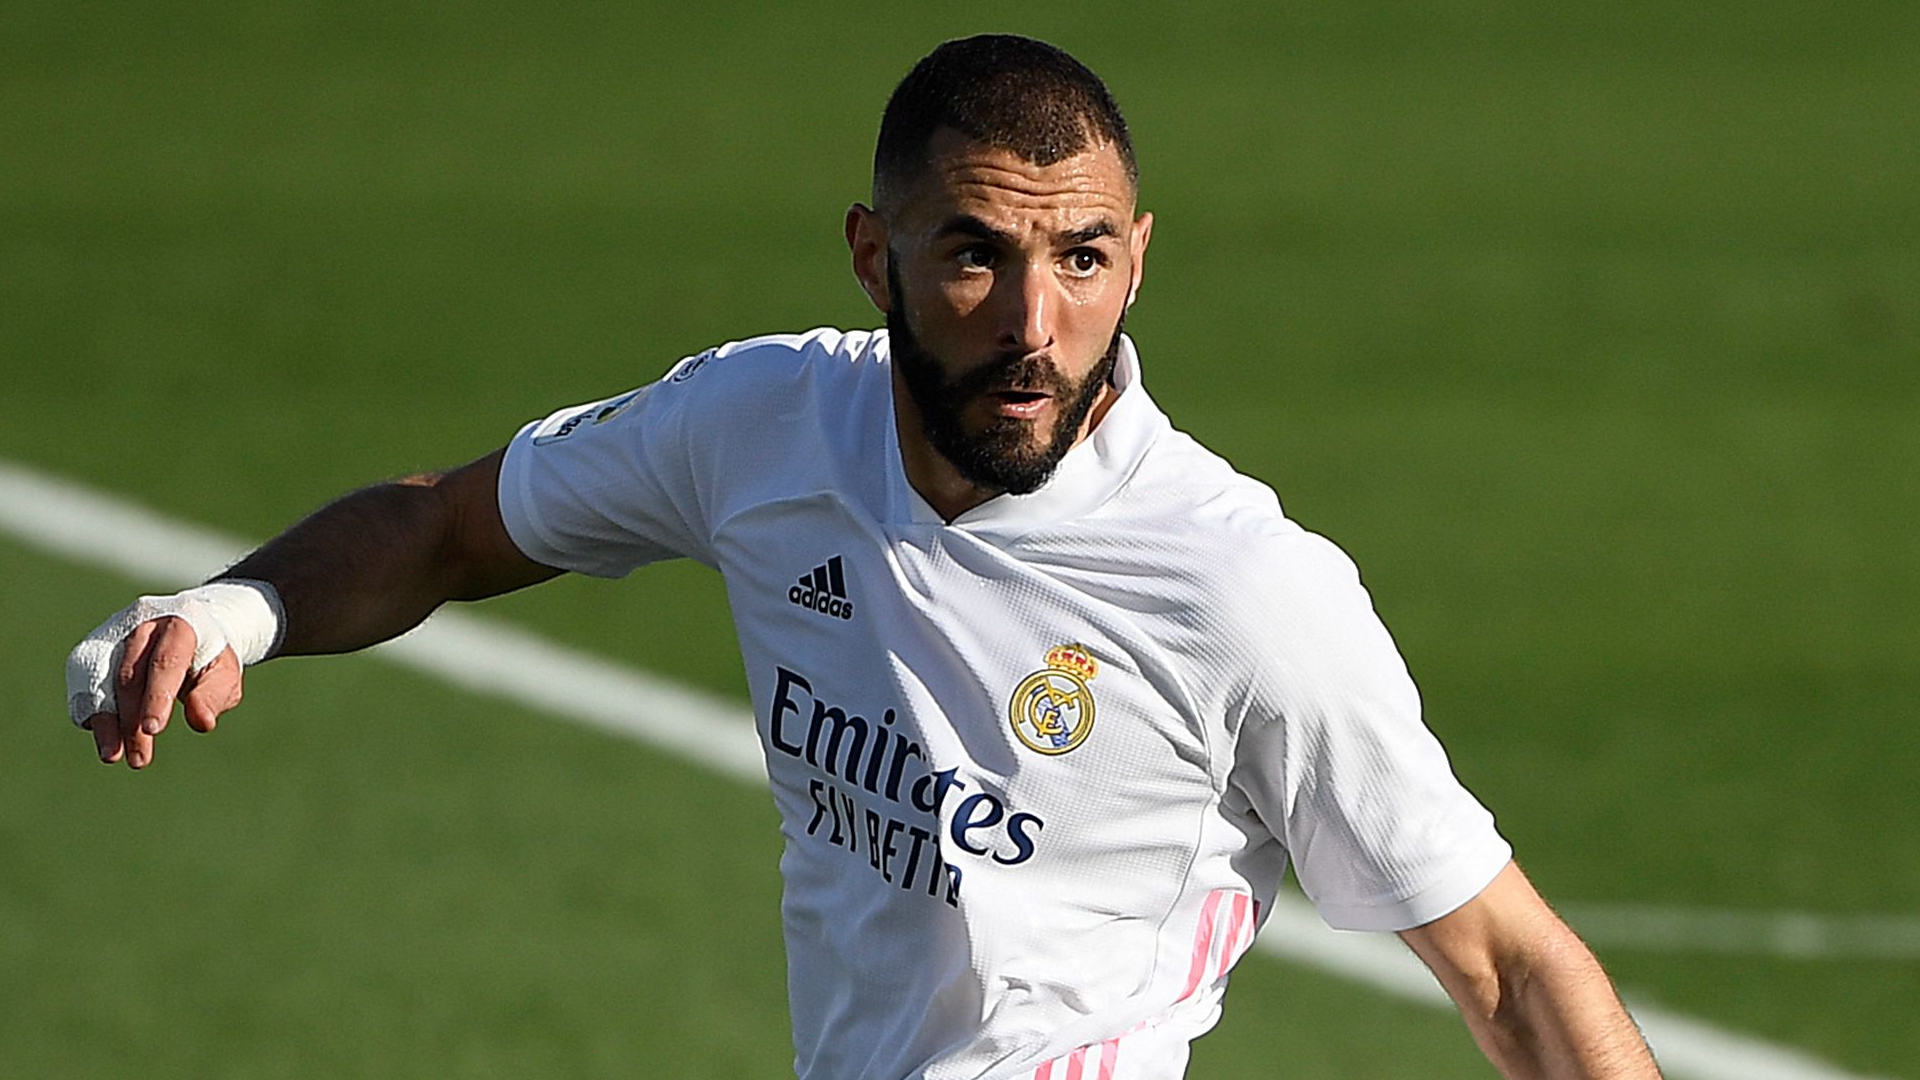 Benzema is in the best form of his Real Madrid career - Zidane